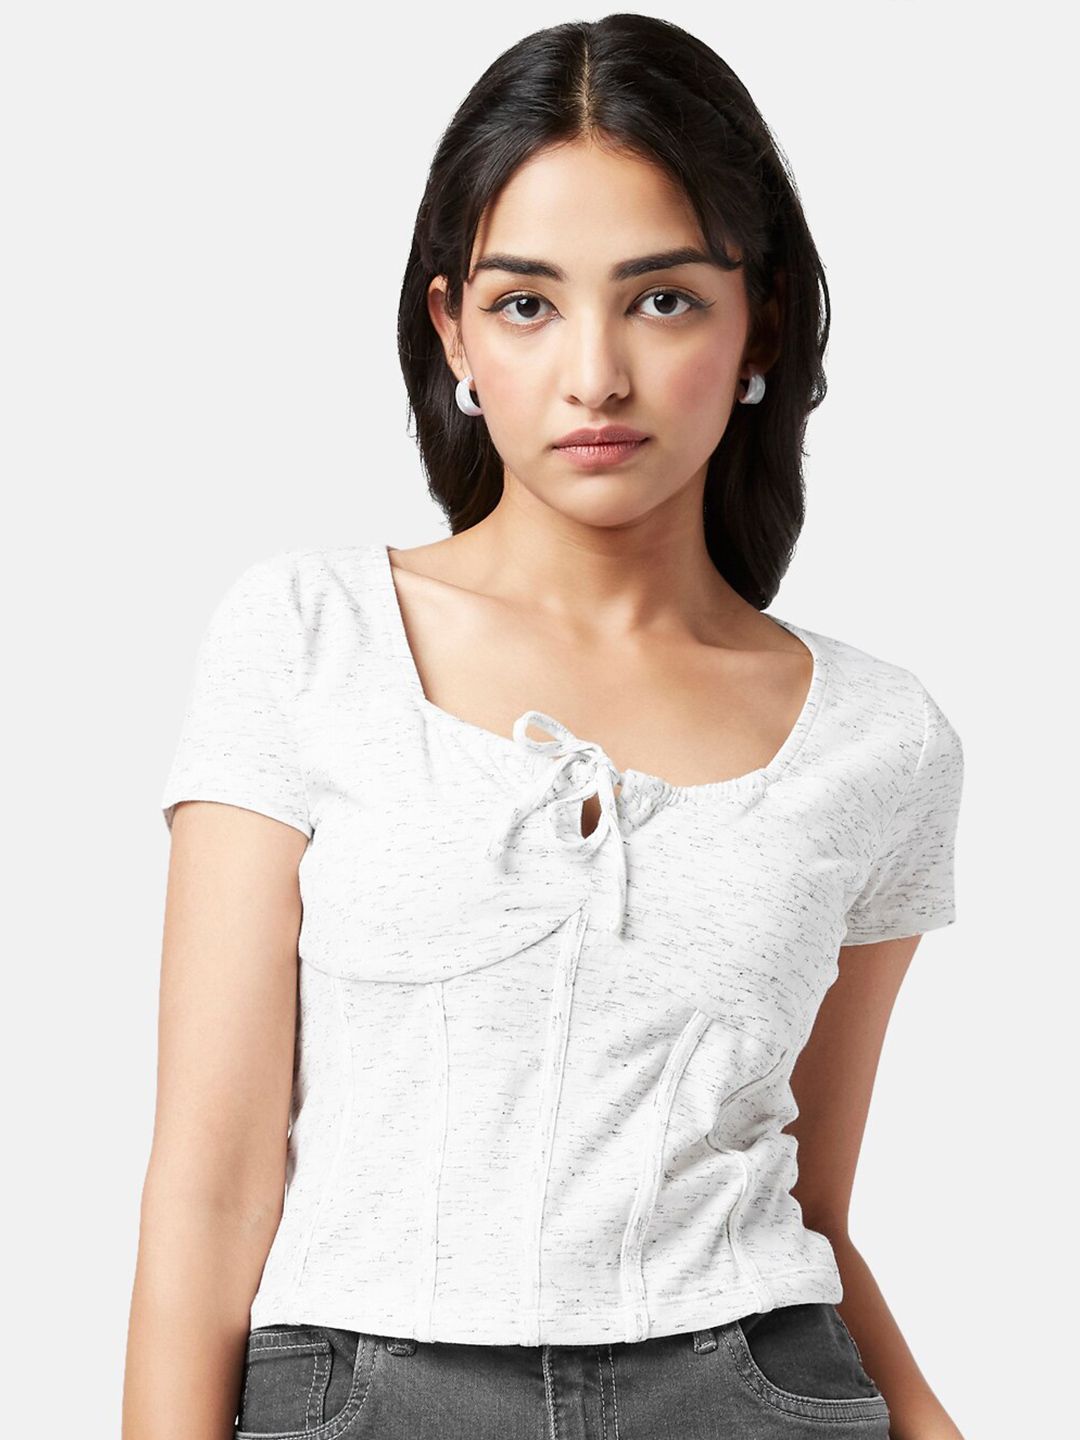 YU by Pantaloons Woman Tie-Up Neck Top Price in India